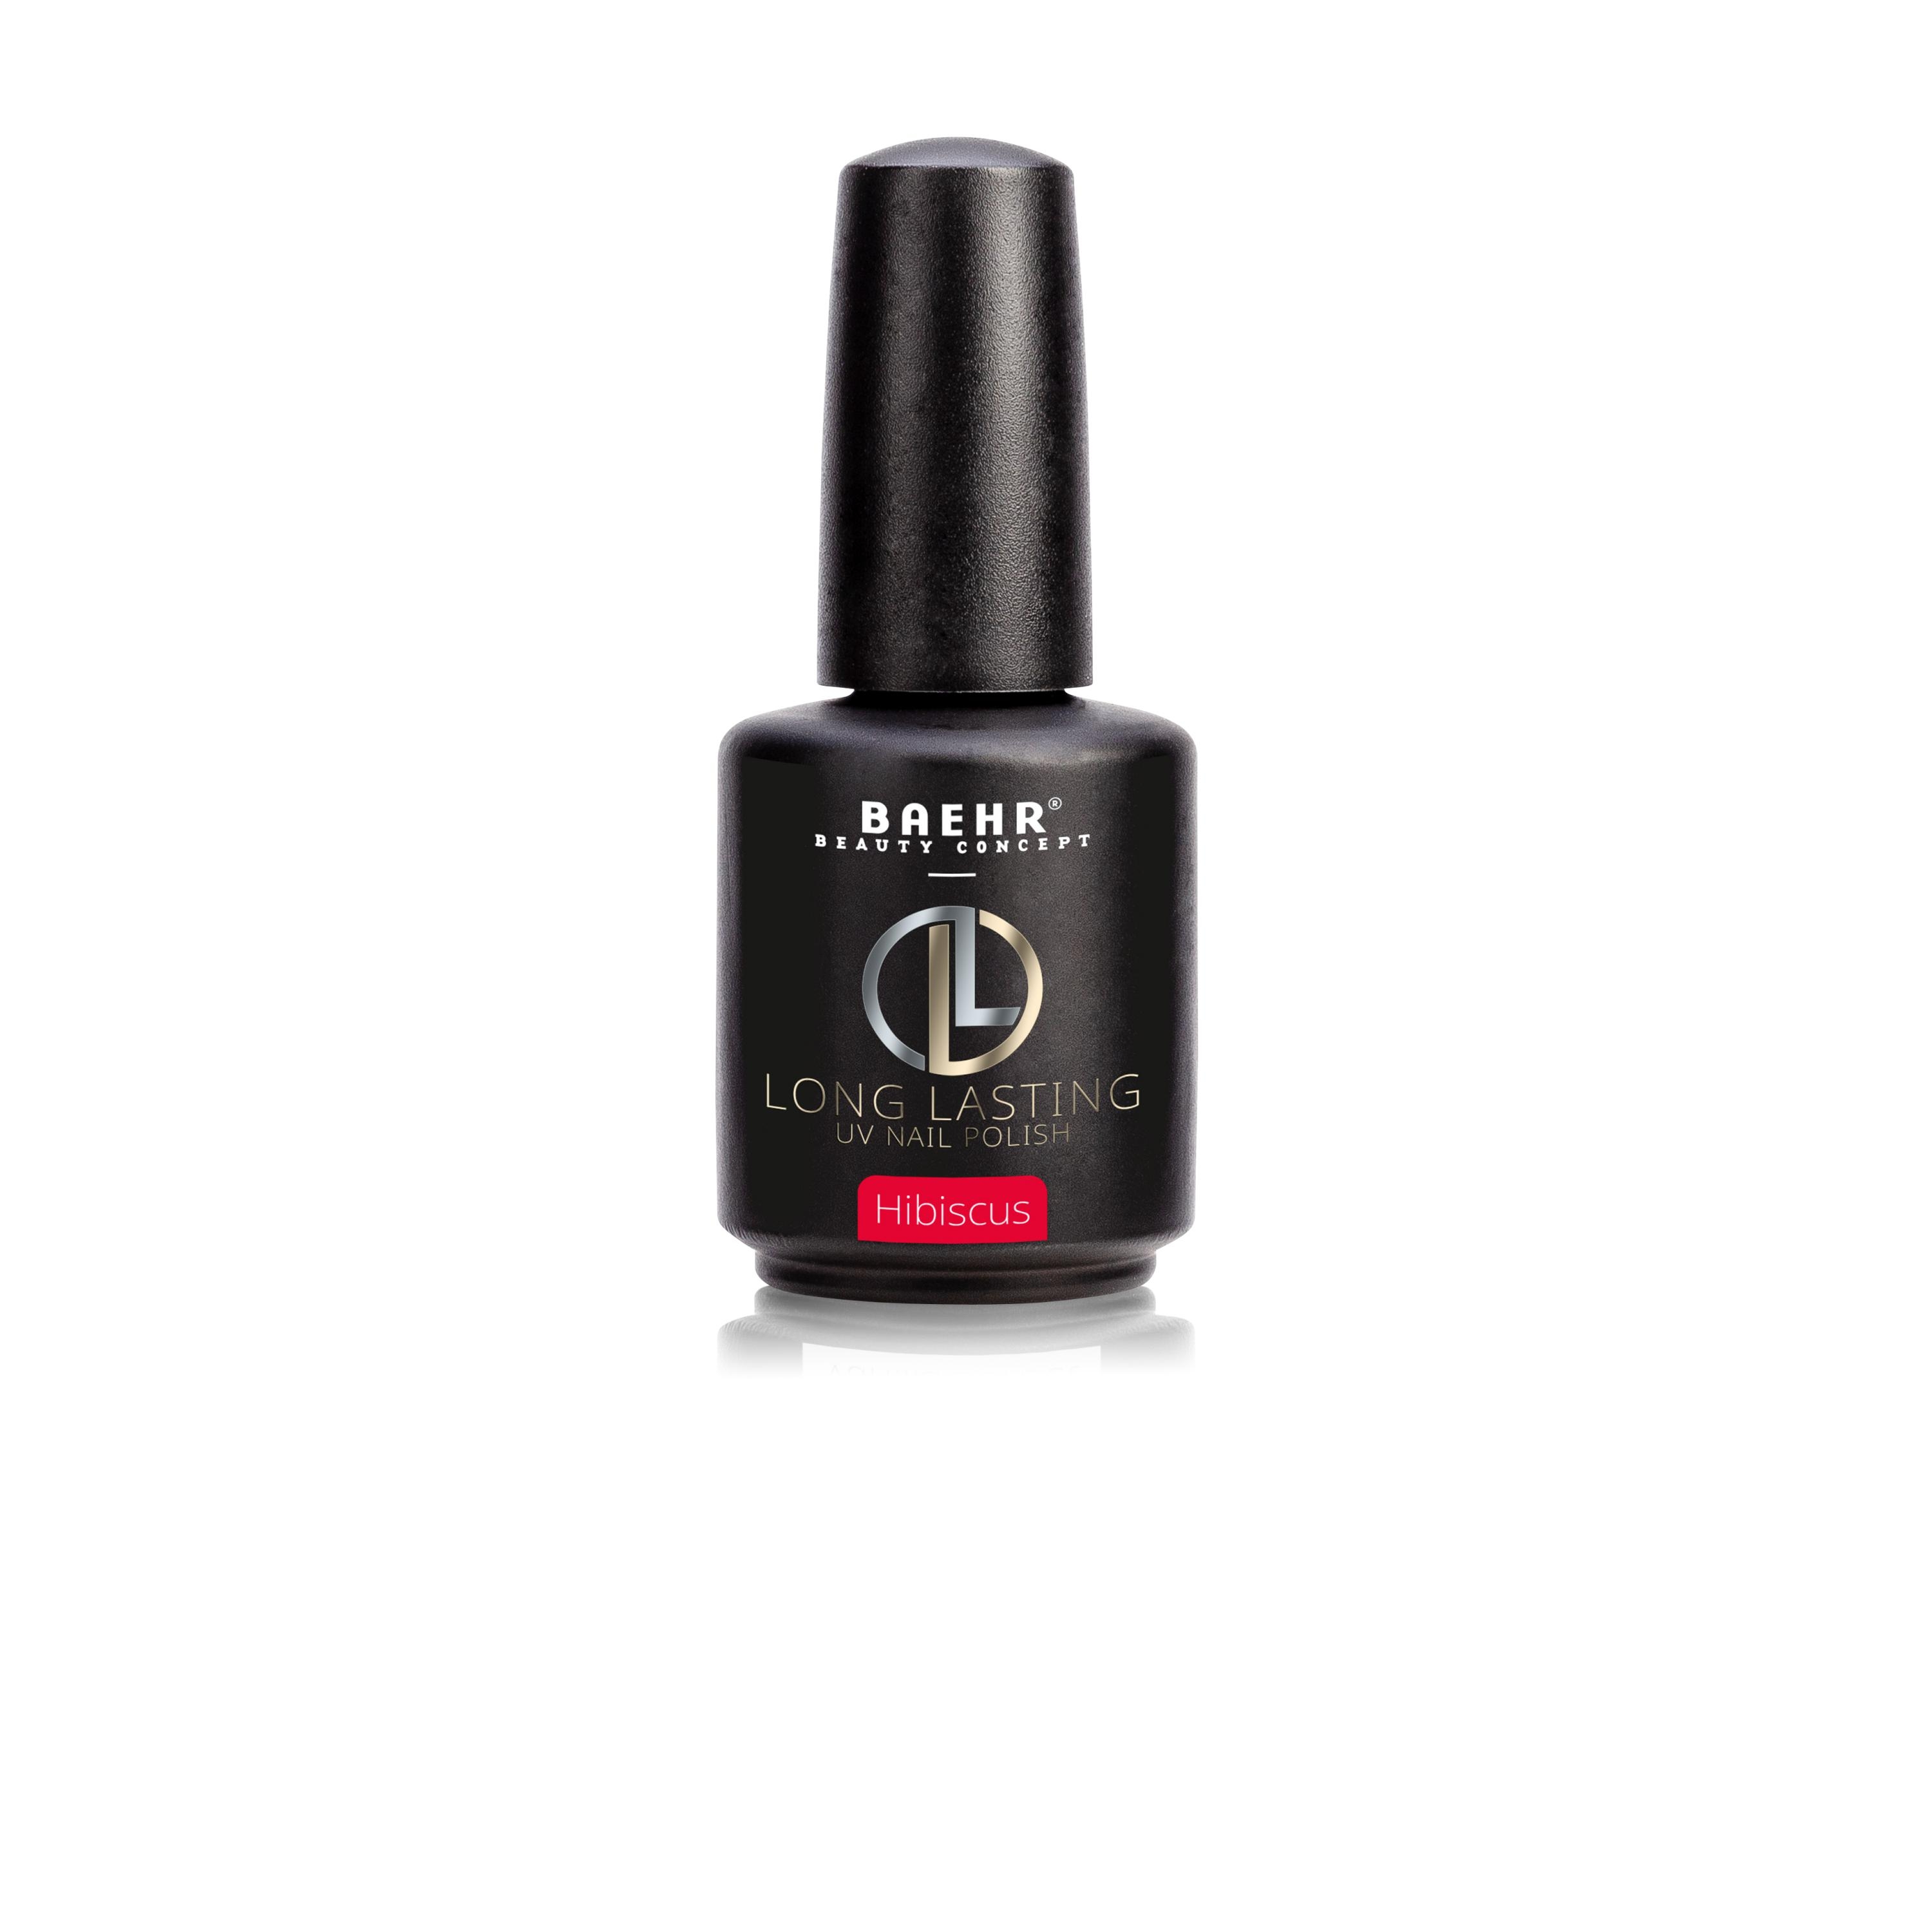 BAEHR BEAUTY CONCEPT - NAILS Long-Lasting Hibiscus 12 ml